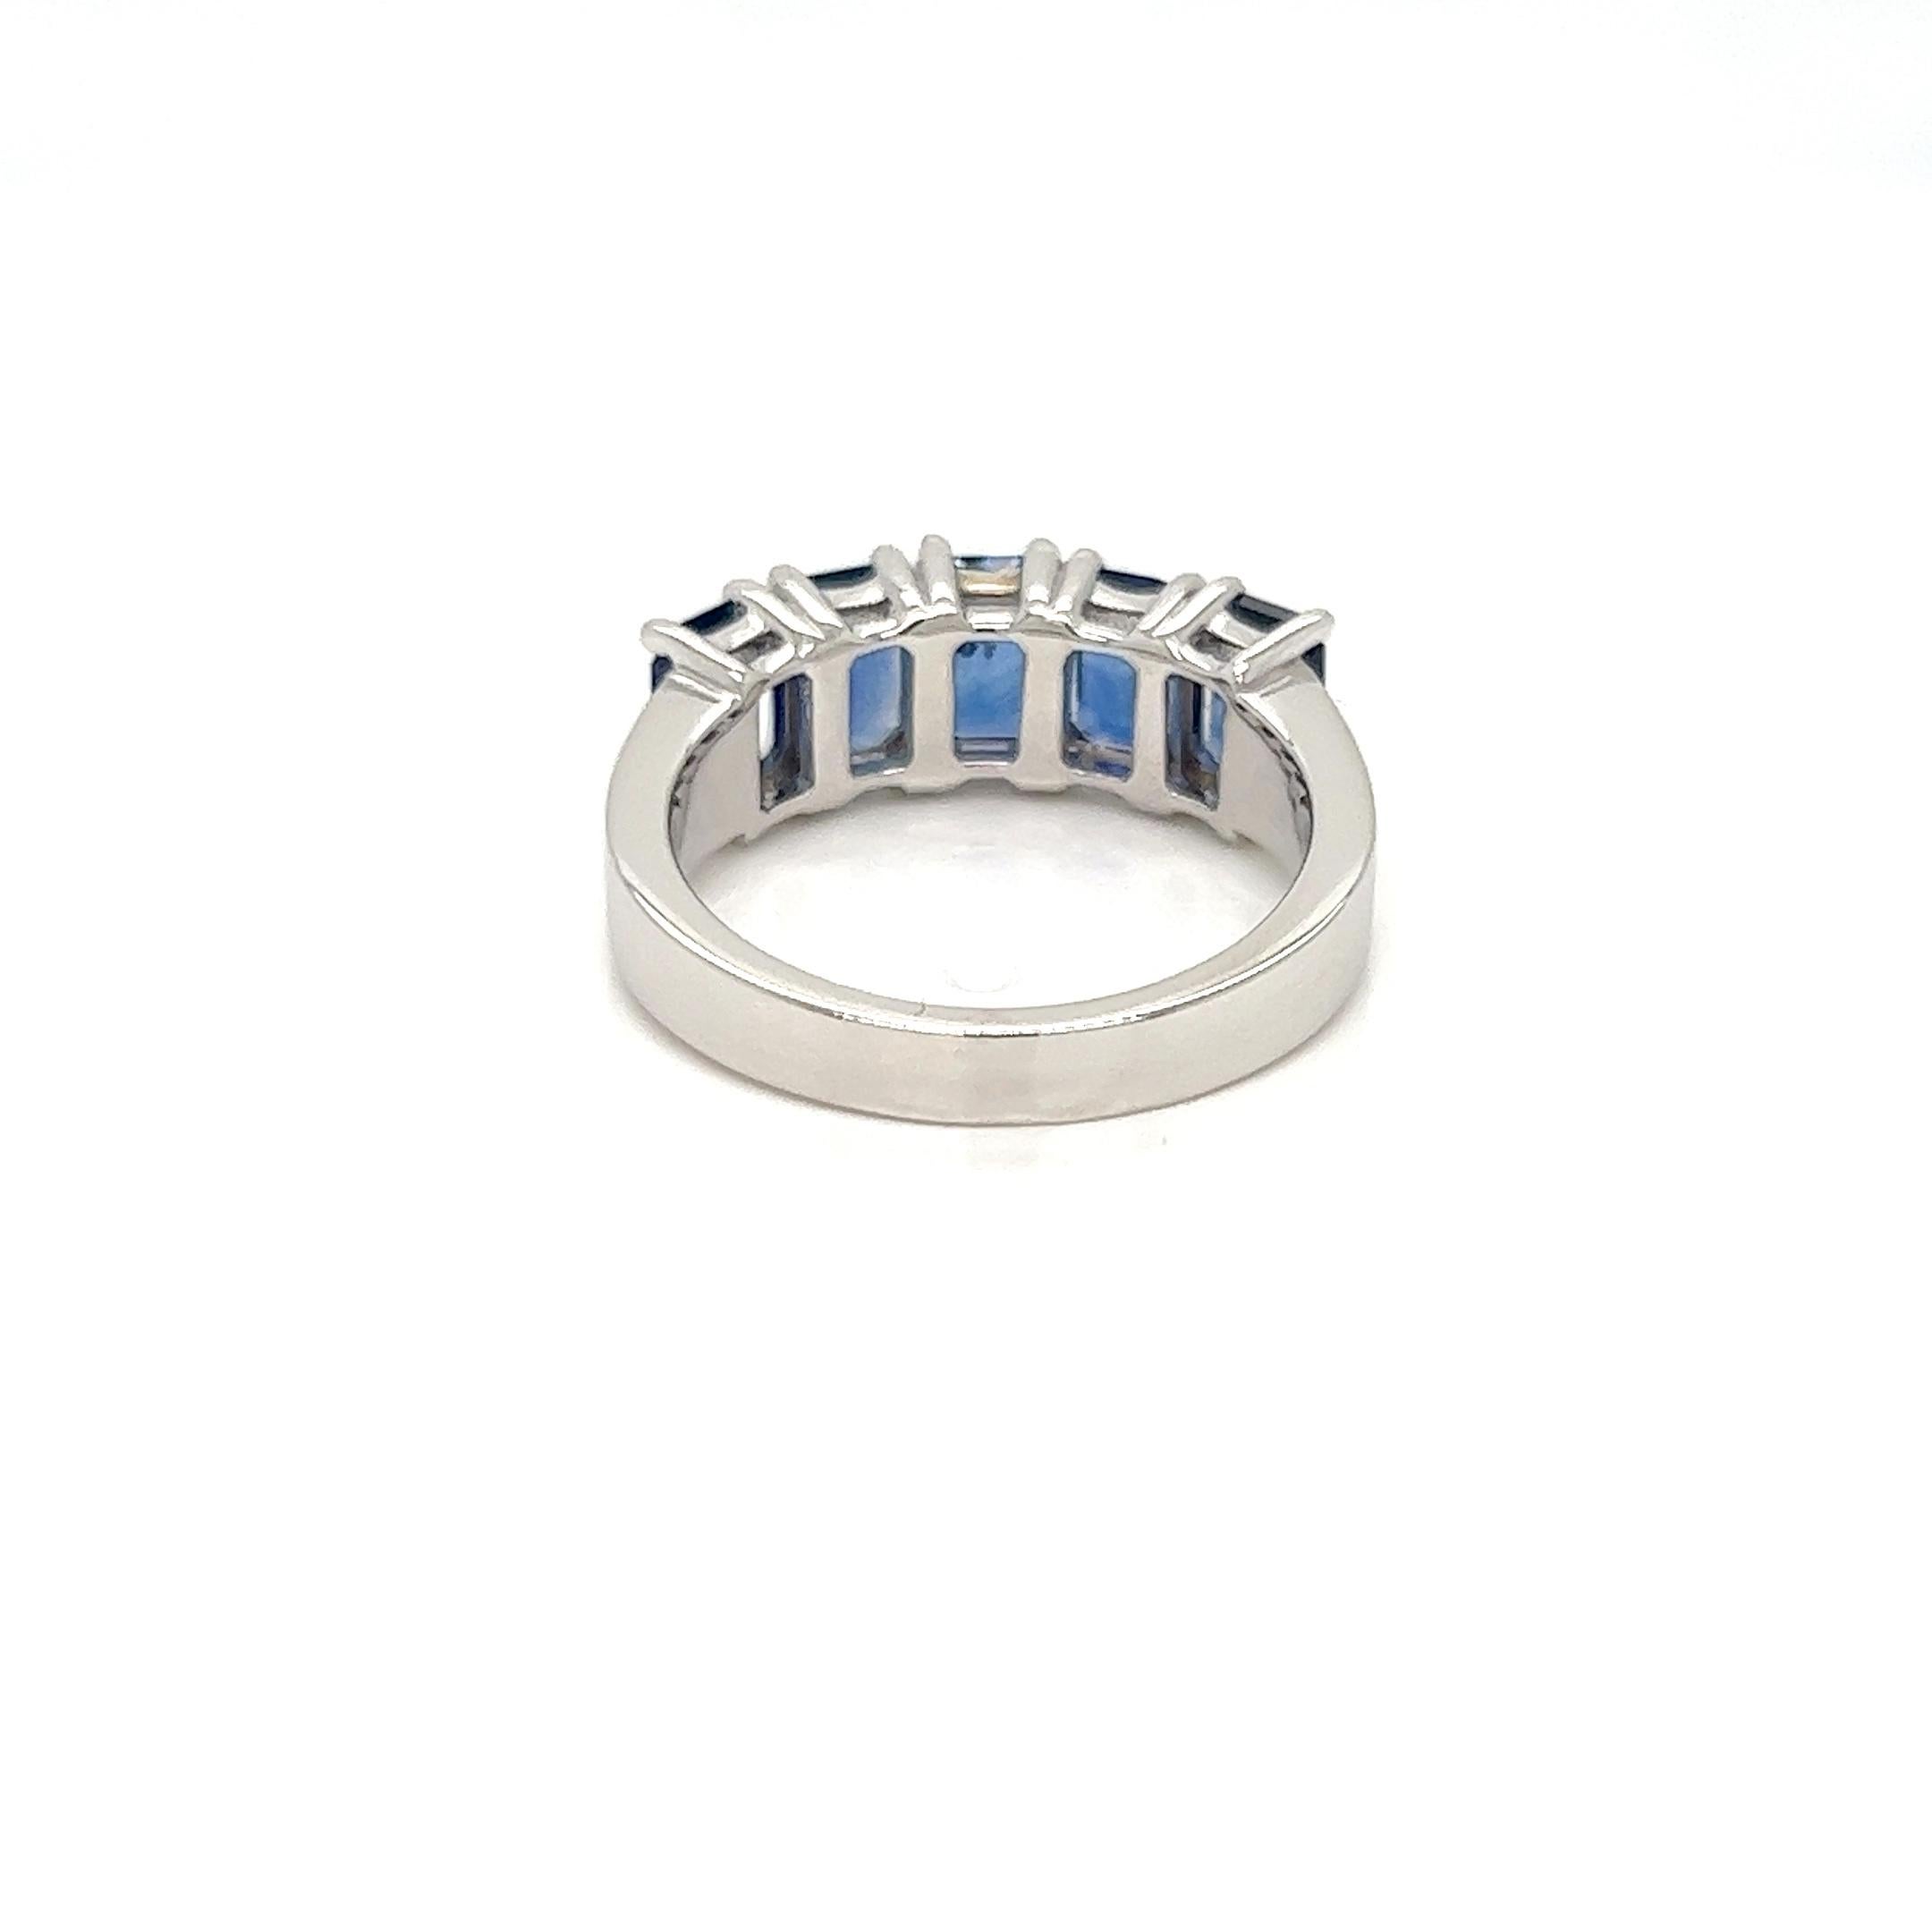 For Sale:  2.89 Carats Sapphire Emerald Cut Eternity Ring in 18K White Gold 4